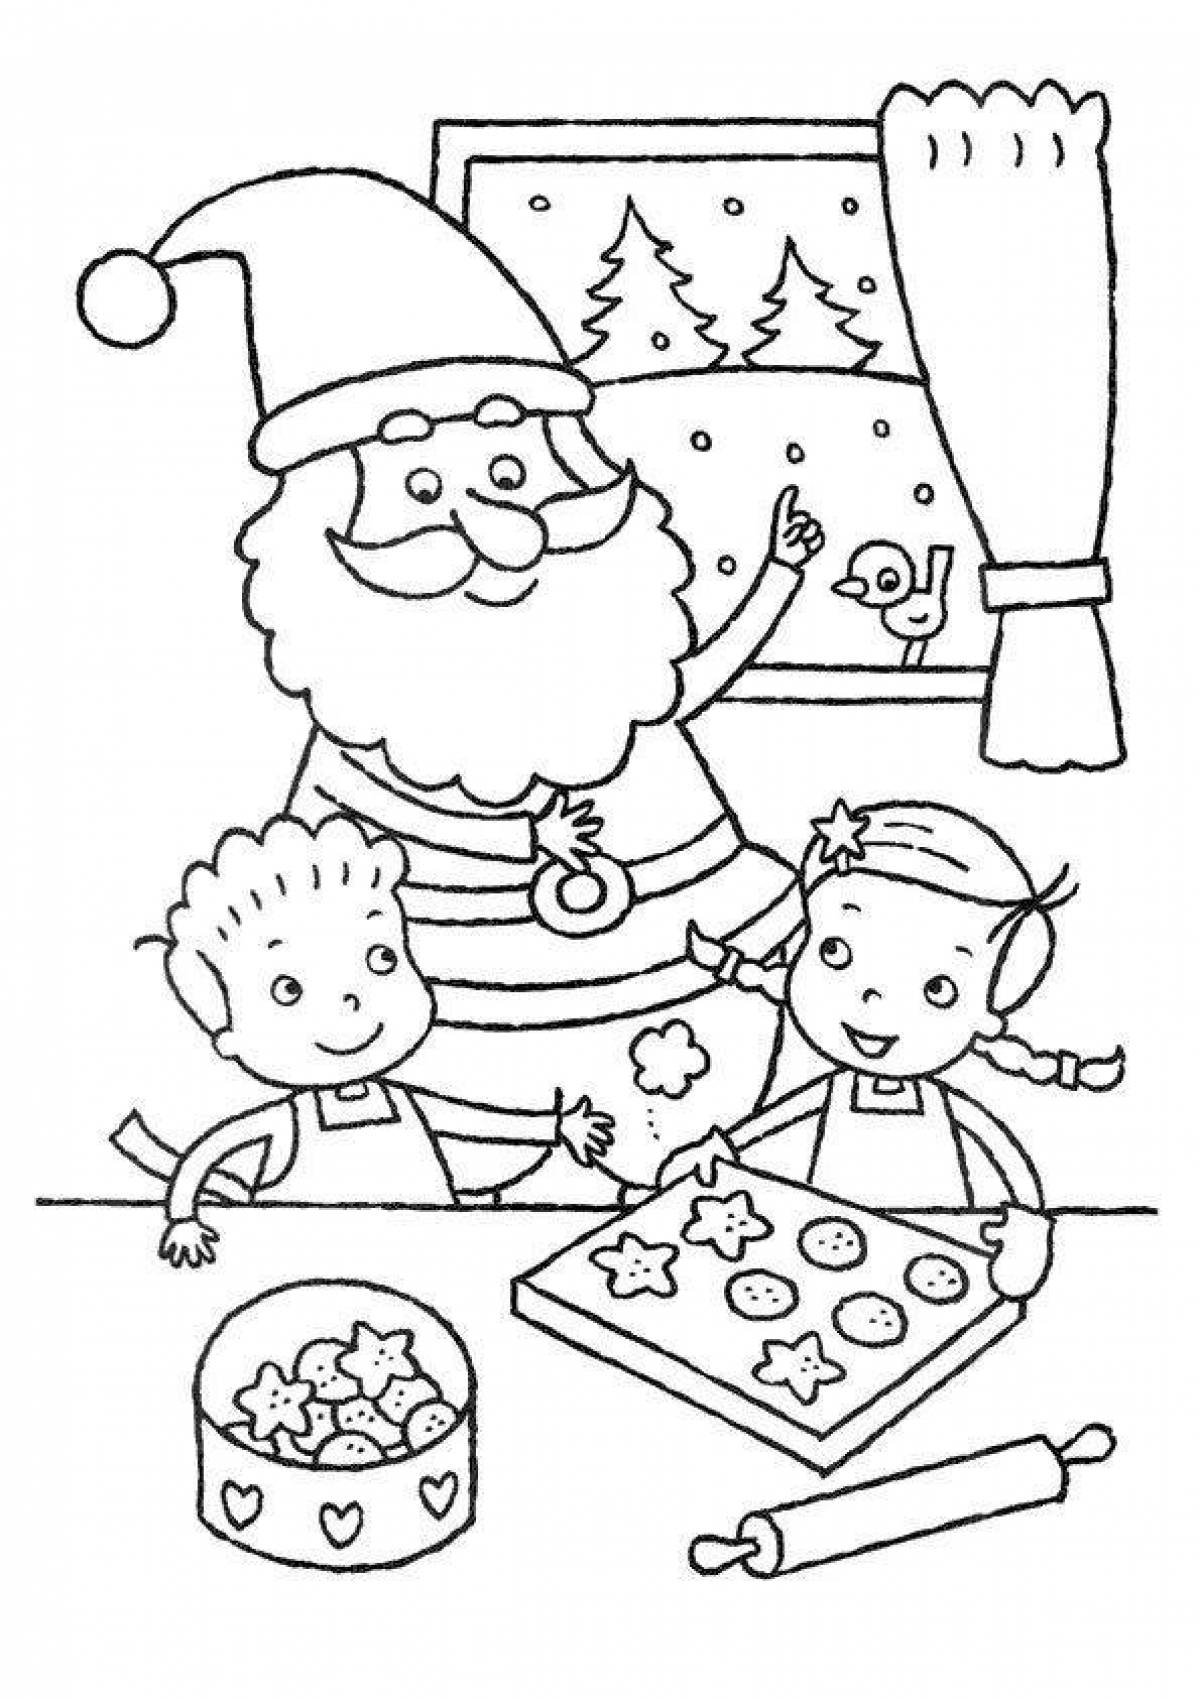 Attractive Christmas coloring games